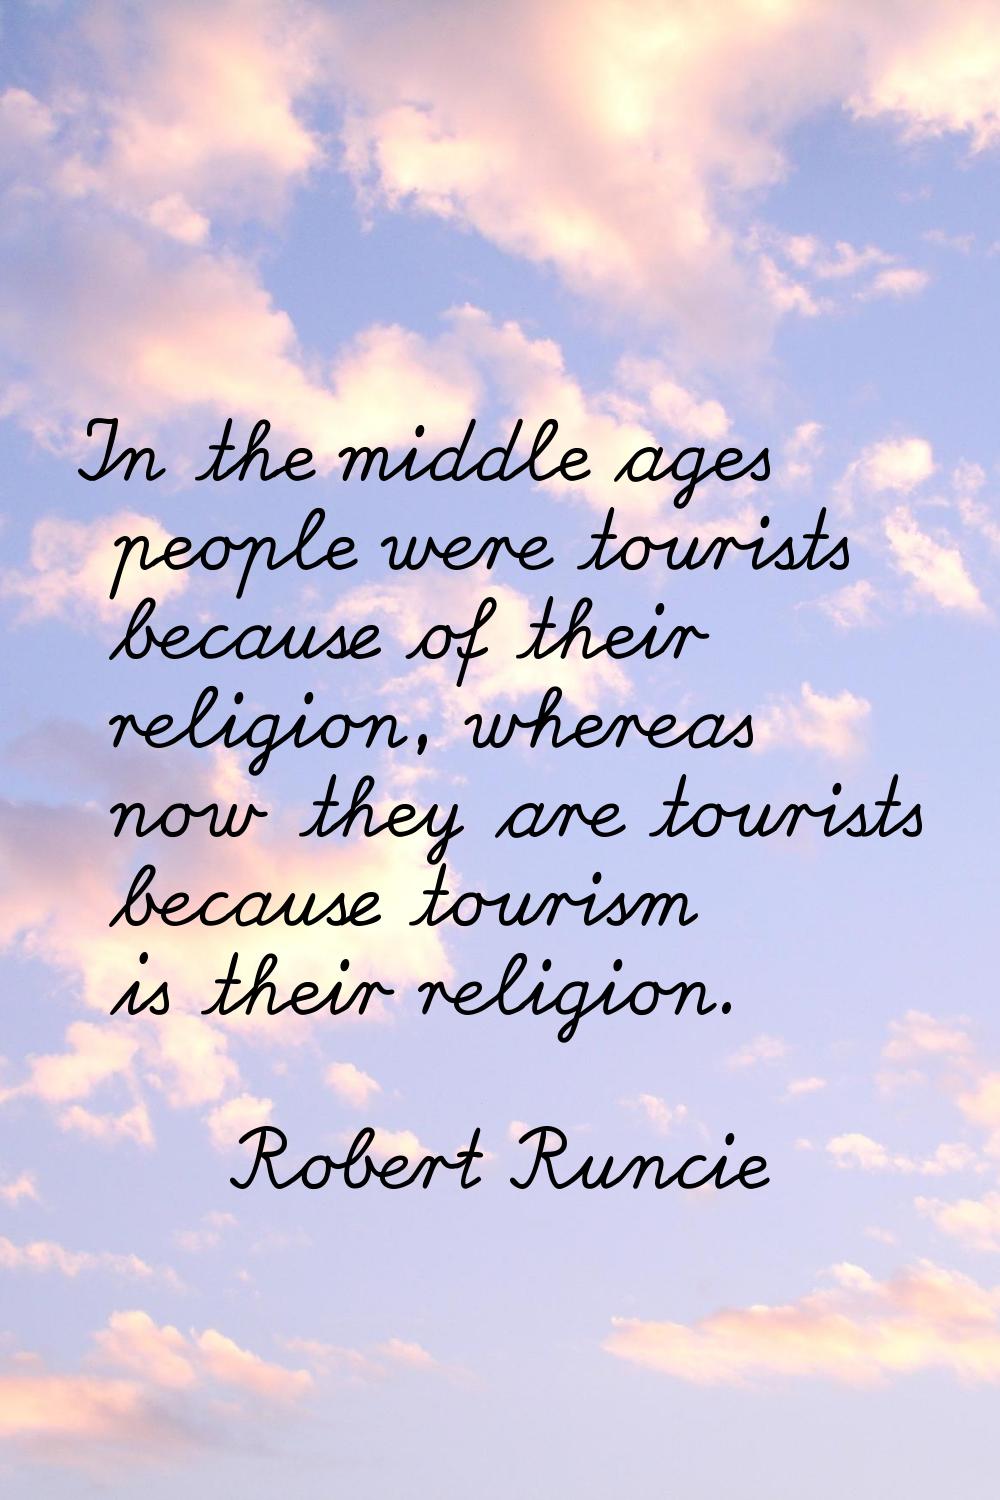 In the middle ages people were tourists because of their religion, whereas now they are tourists be